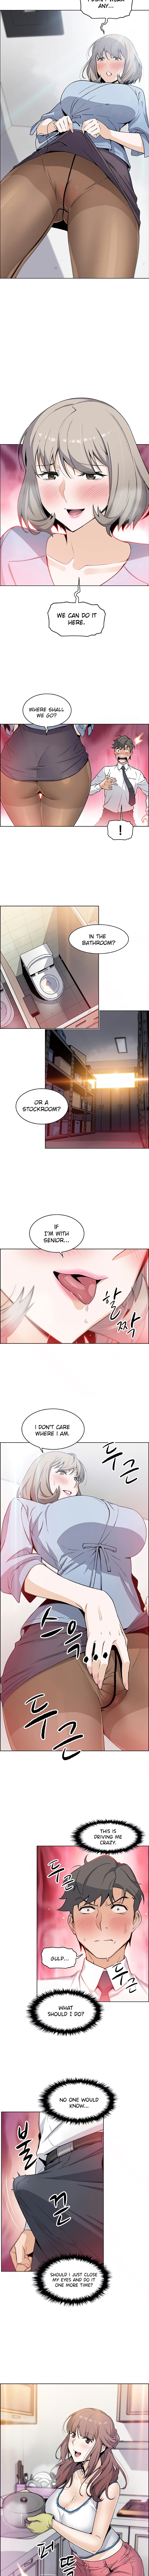 Housekeeper Manhwa - Chapter 30 Page 2